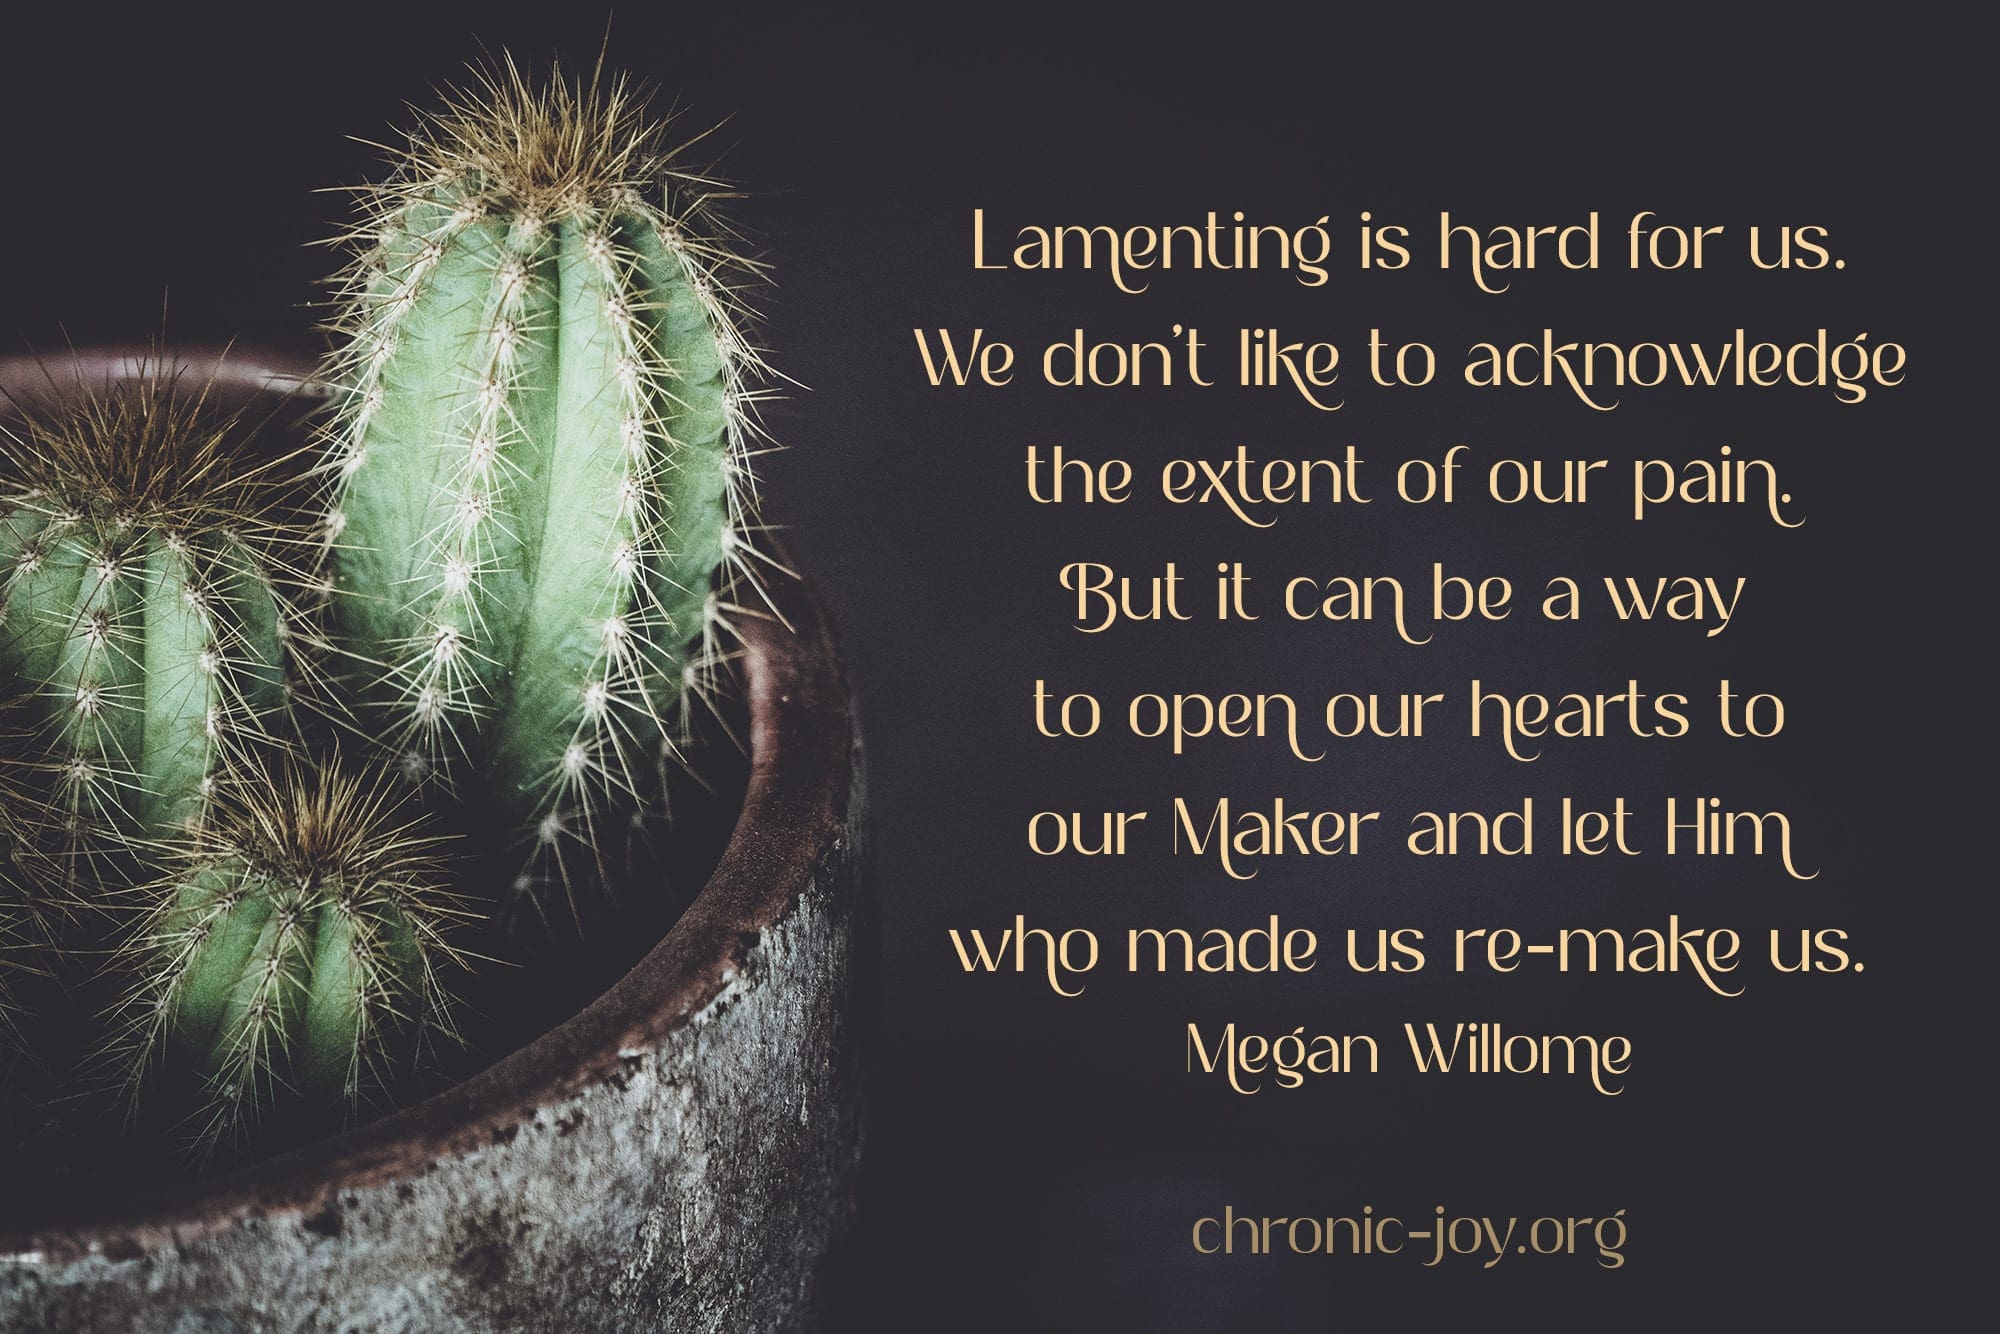 "Lamenting is hard for us. We don’t like to acknowledge the extent of our pain. But it can be a way to open our hearts to our Maker and let Him who made us re-make us." Megan Willome